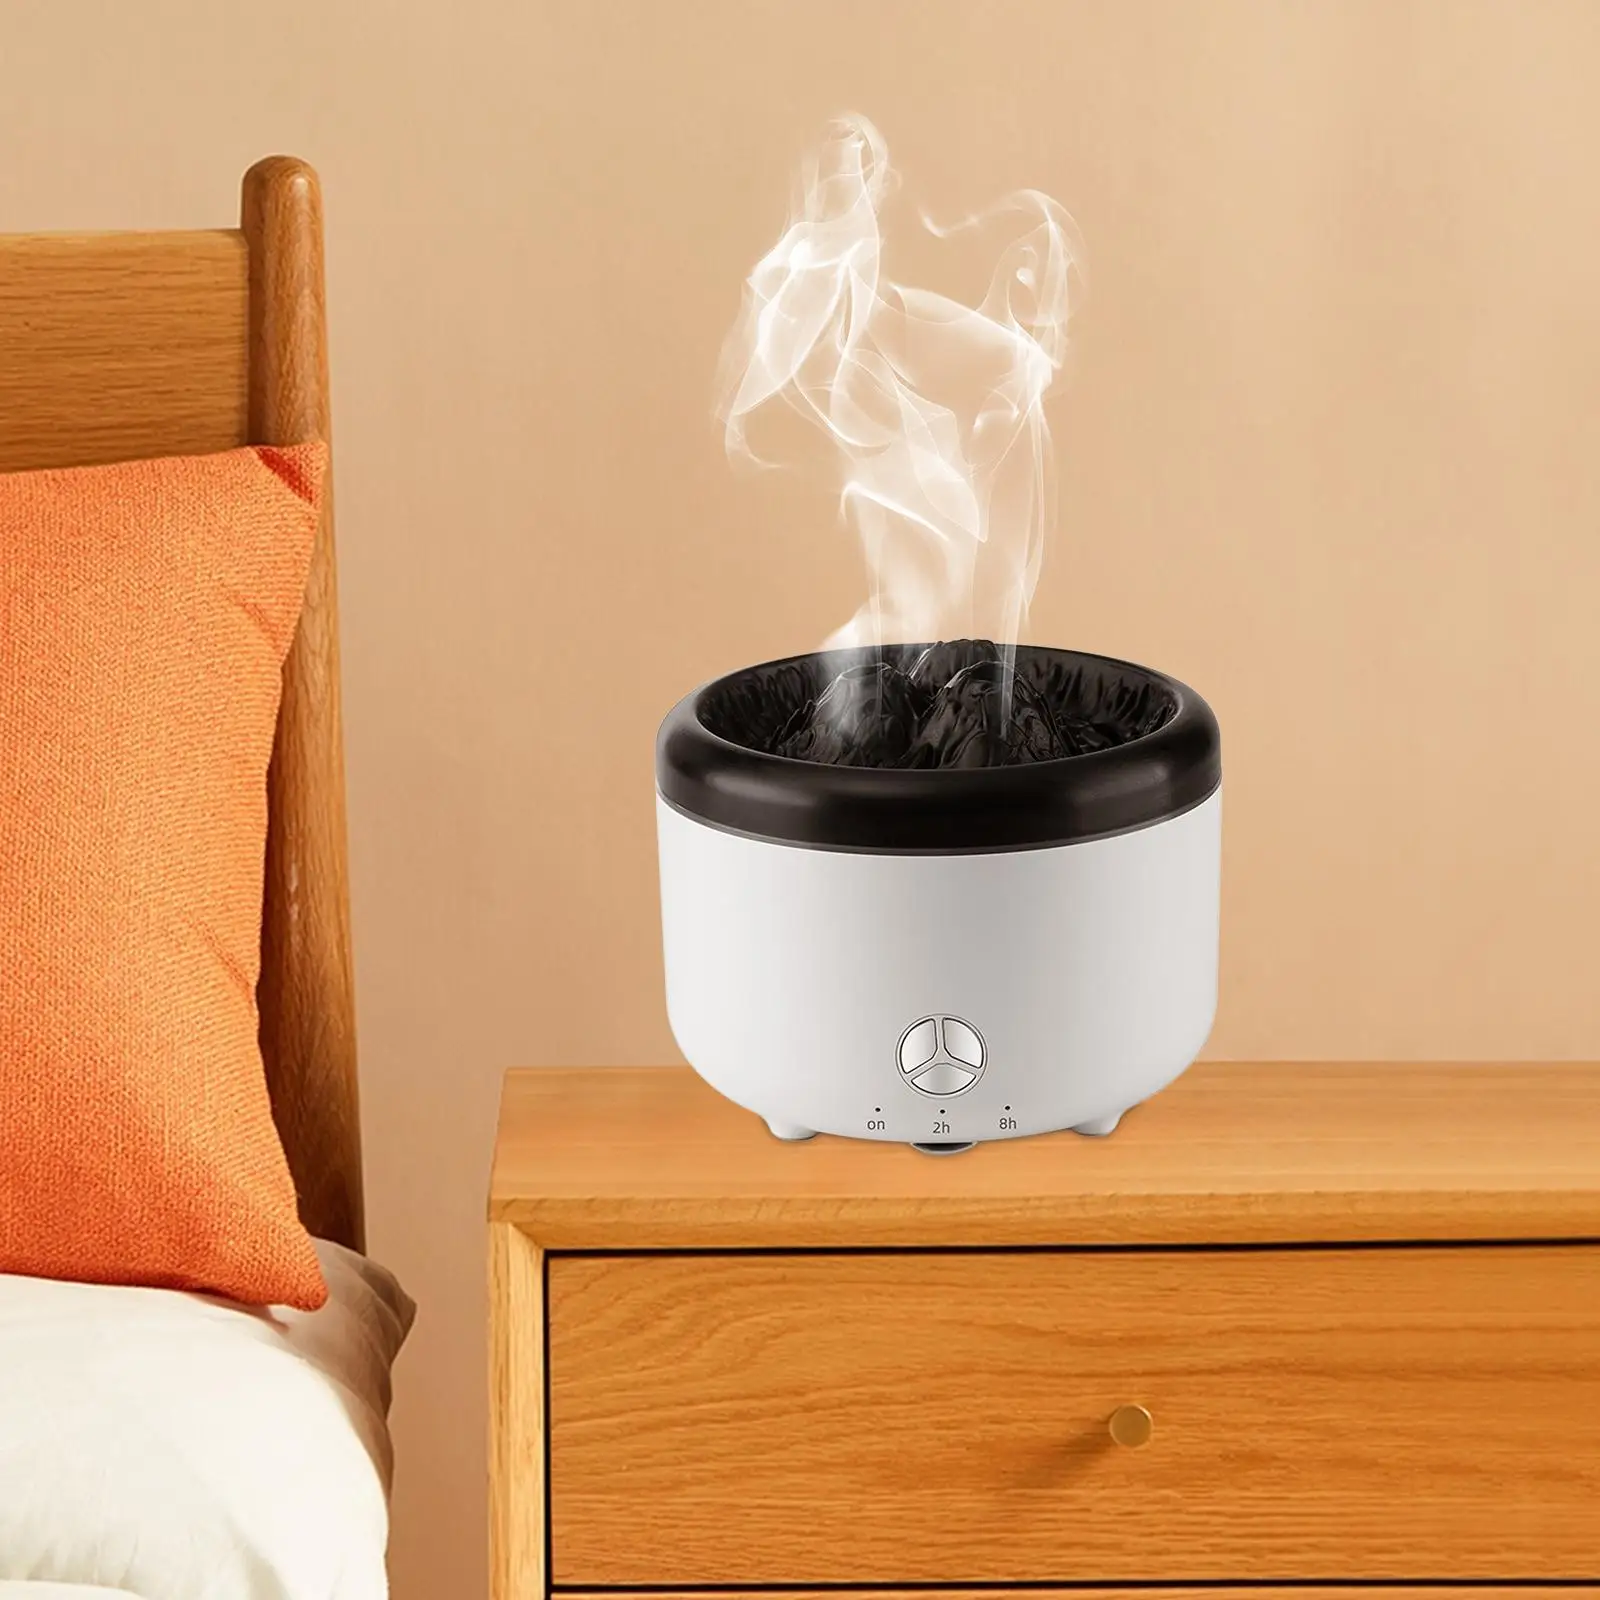 Flame Aromatherapy Humidifier 500ml Auto Shut Off Sturdy 2 Flame Light Colors Aroma Diffuser for Desktop Bedroom Home Yoga Decor